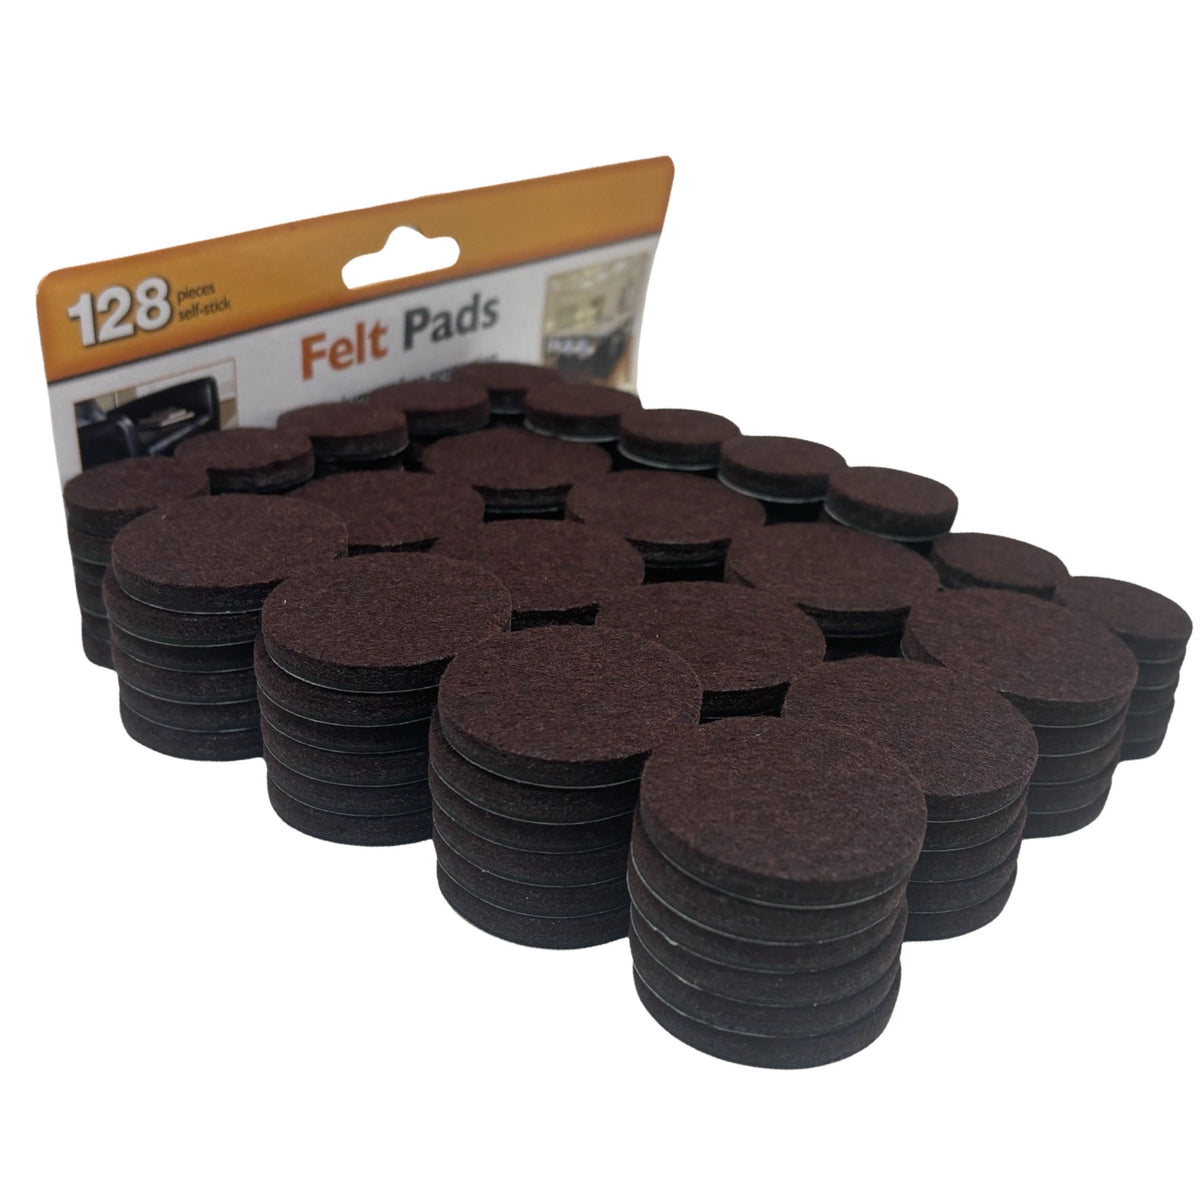 128pc Felt Pad Multi-Pack for Hard Surfaces - Premium Surface Protection